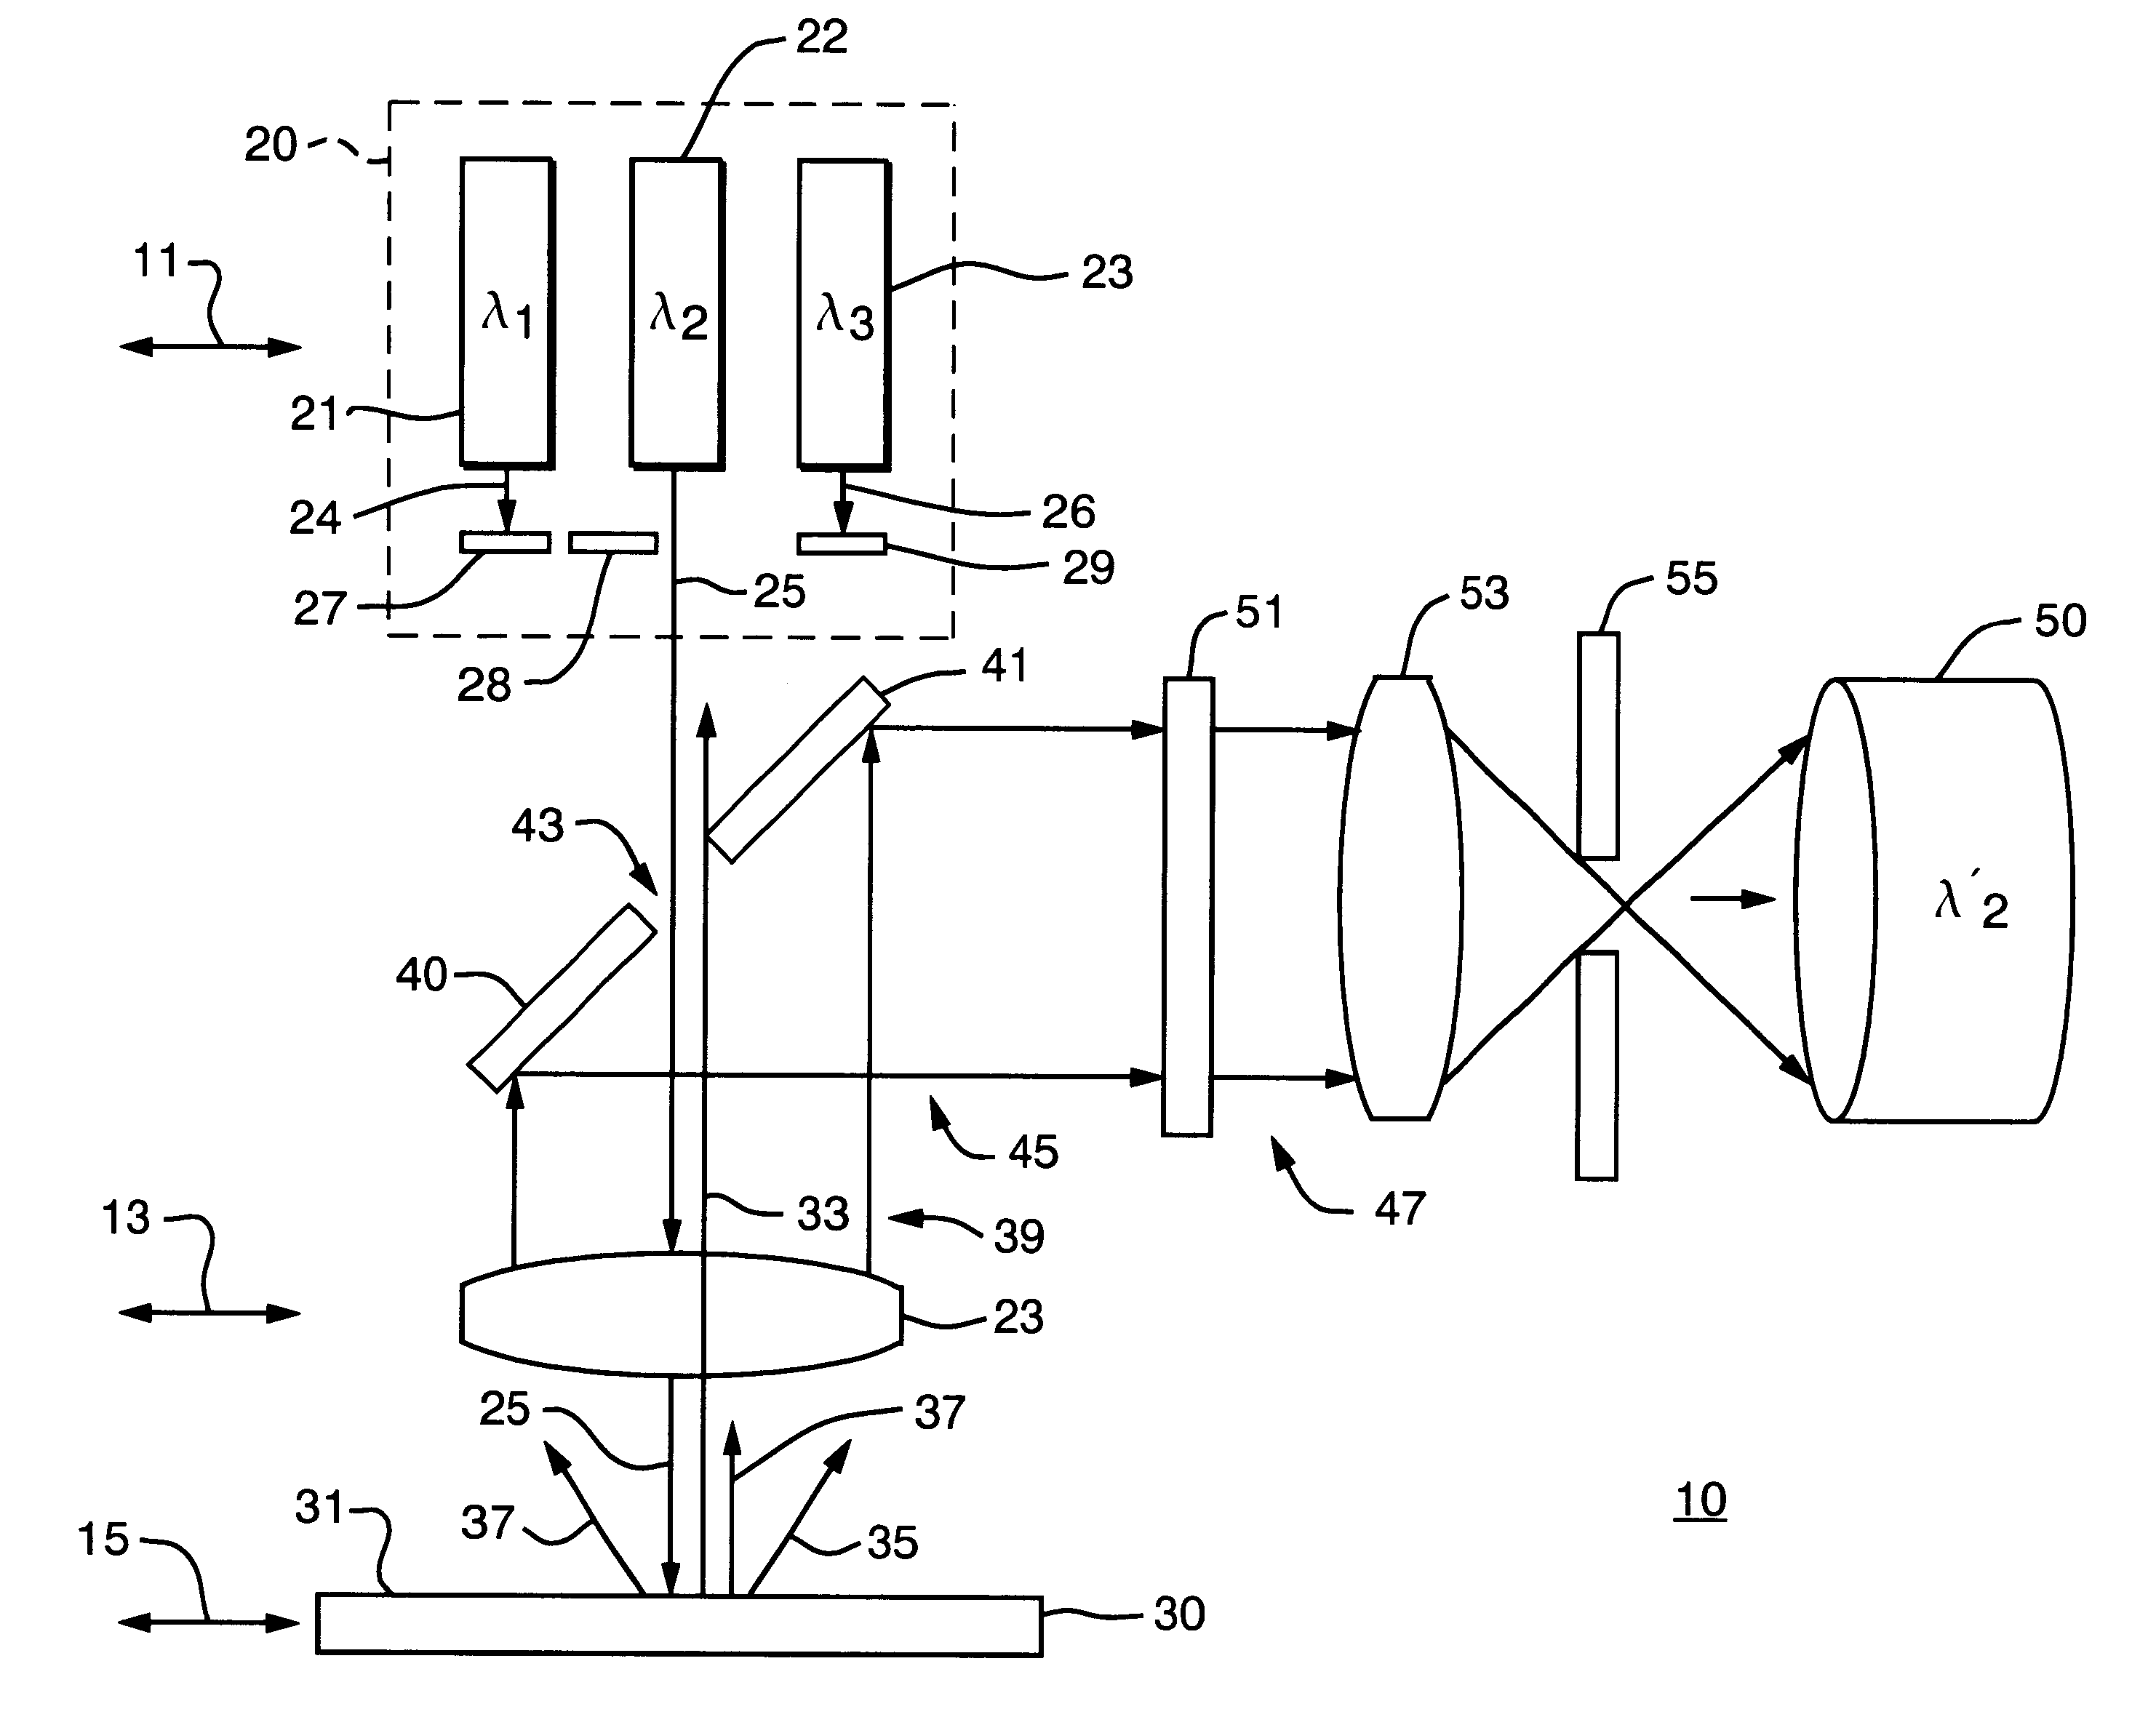 Imaging system for an optical scanner